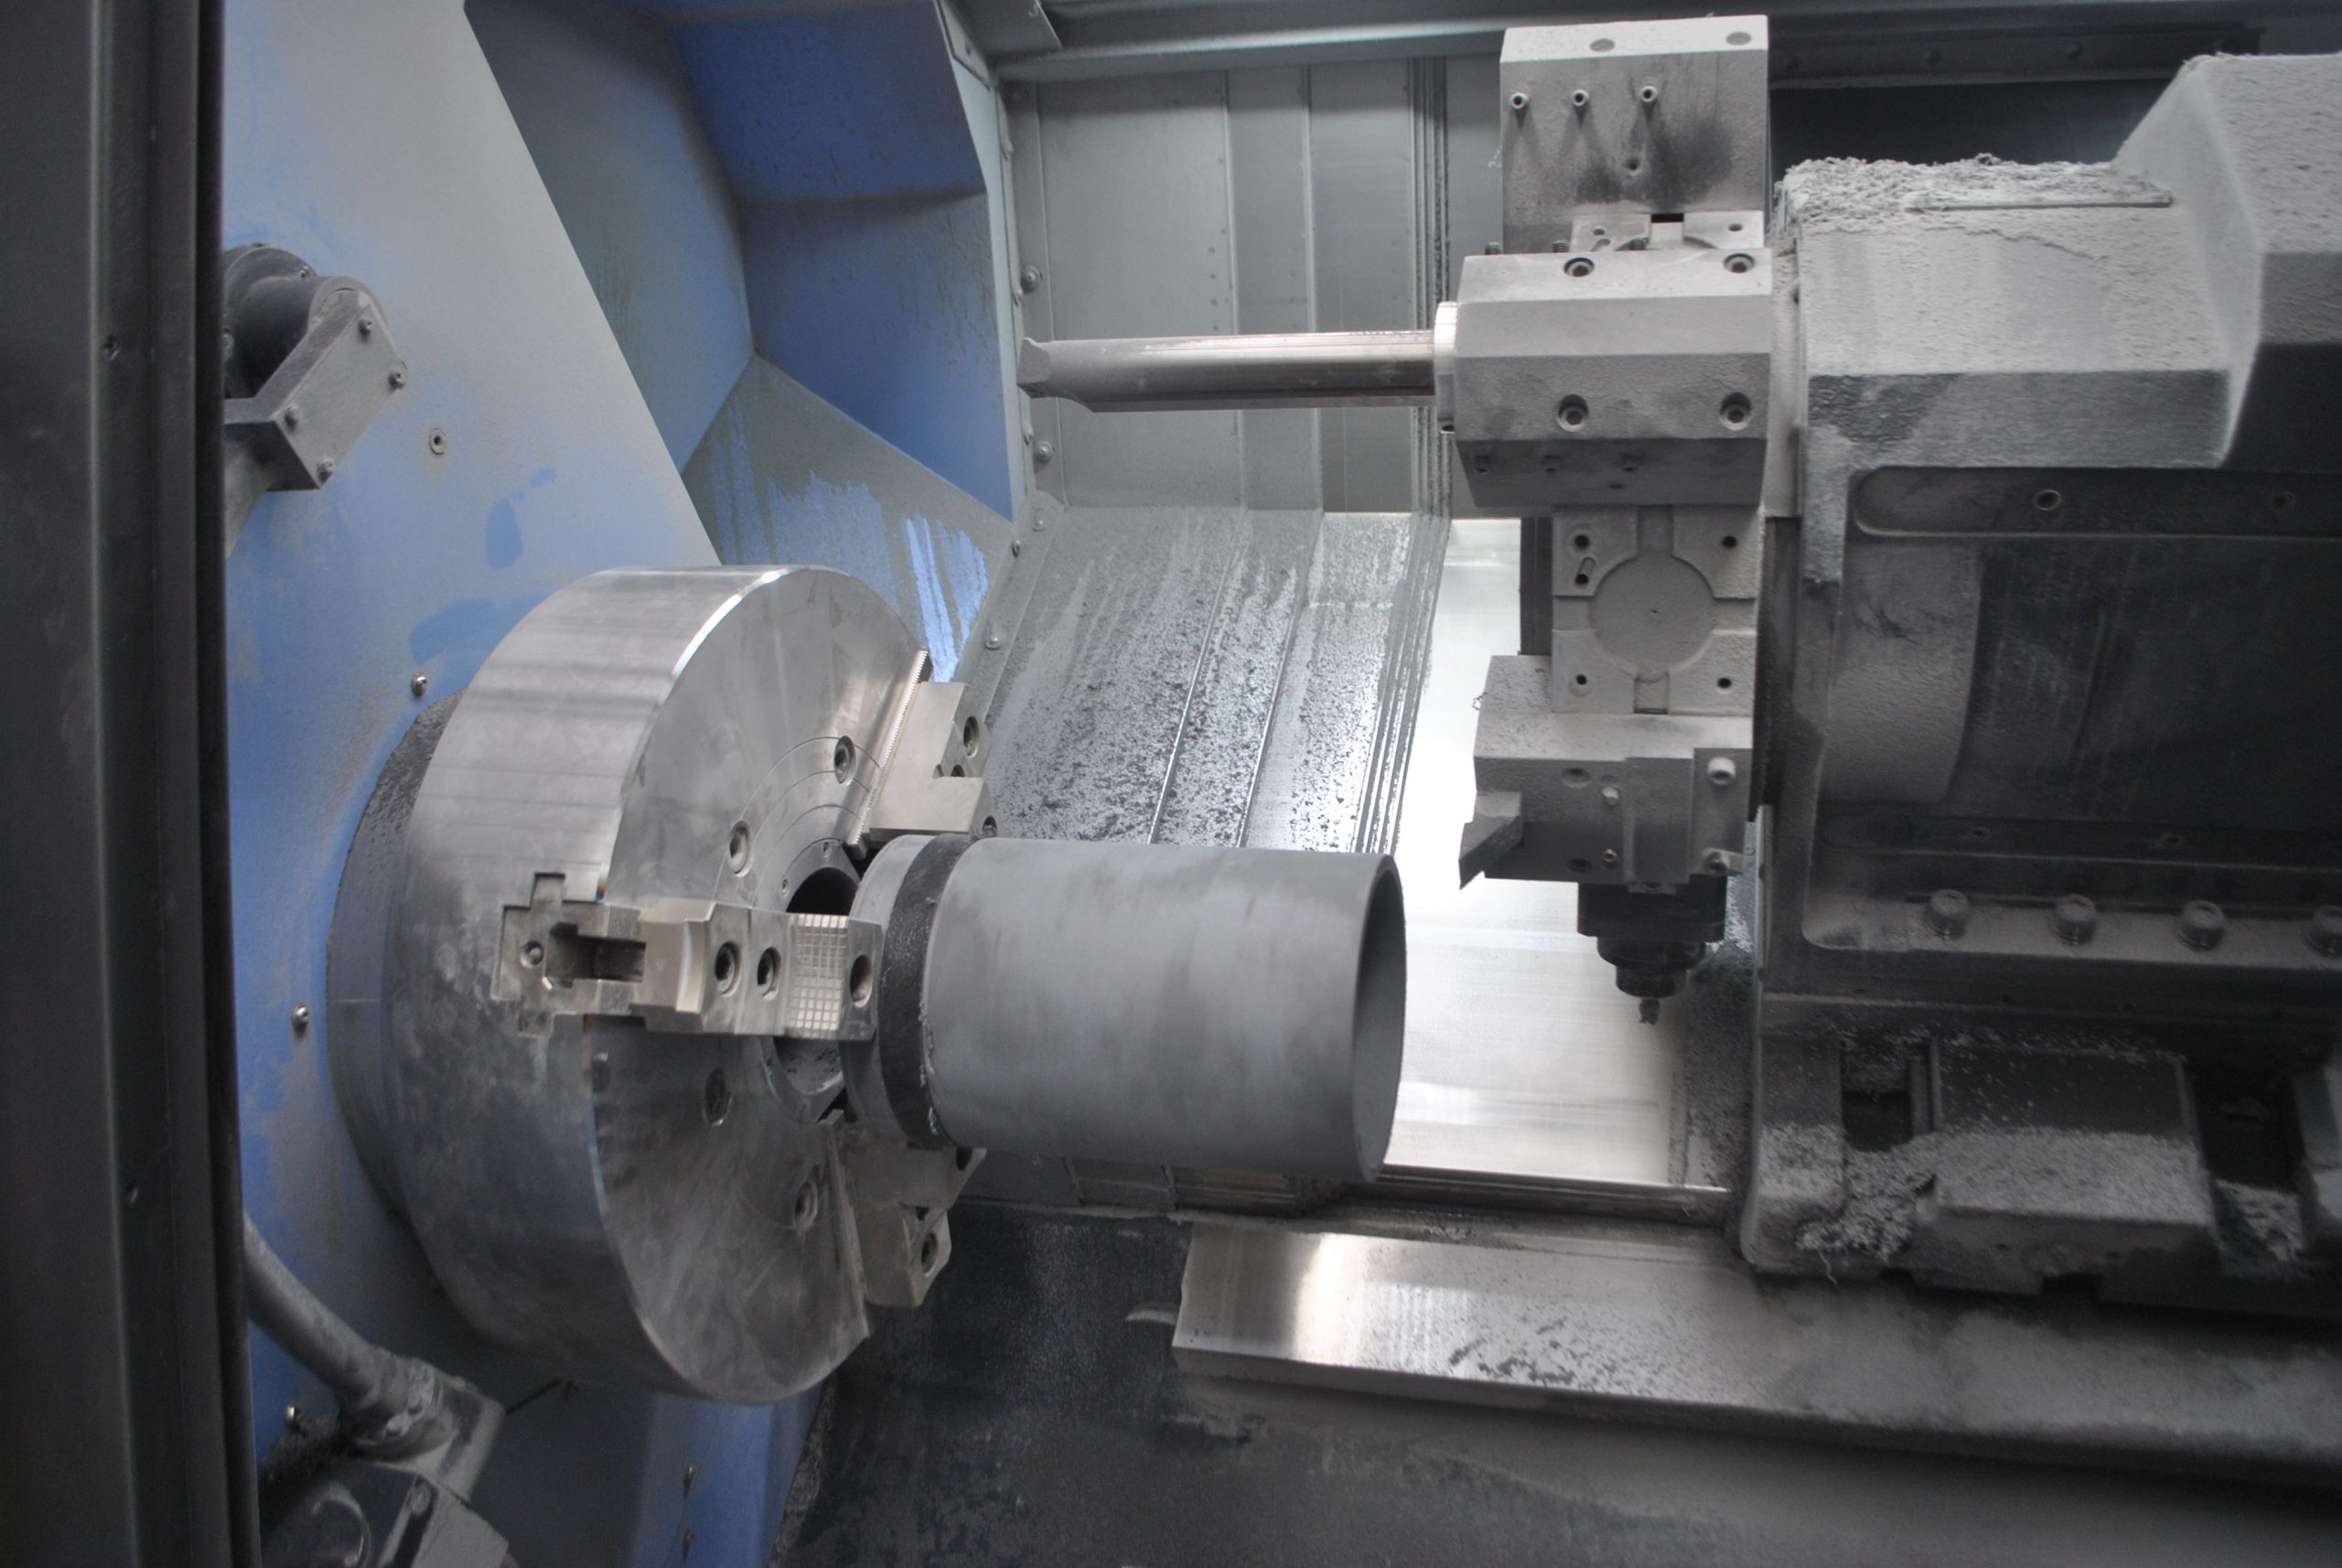 Close up of the interior of a Puma 700LM II large-capacity, multi-tasking lathe at Tufcot Engineering